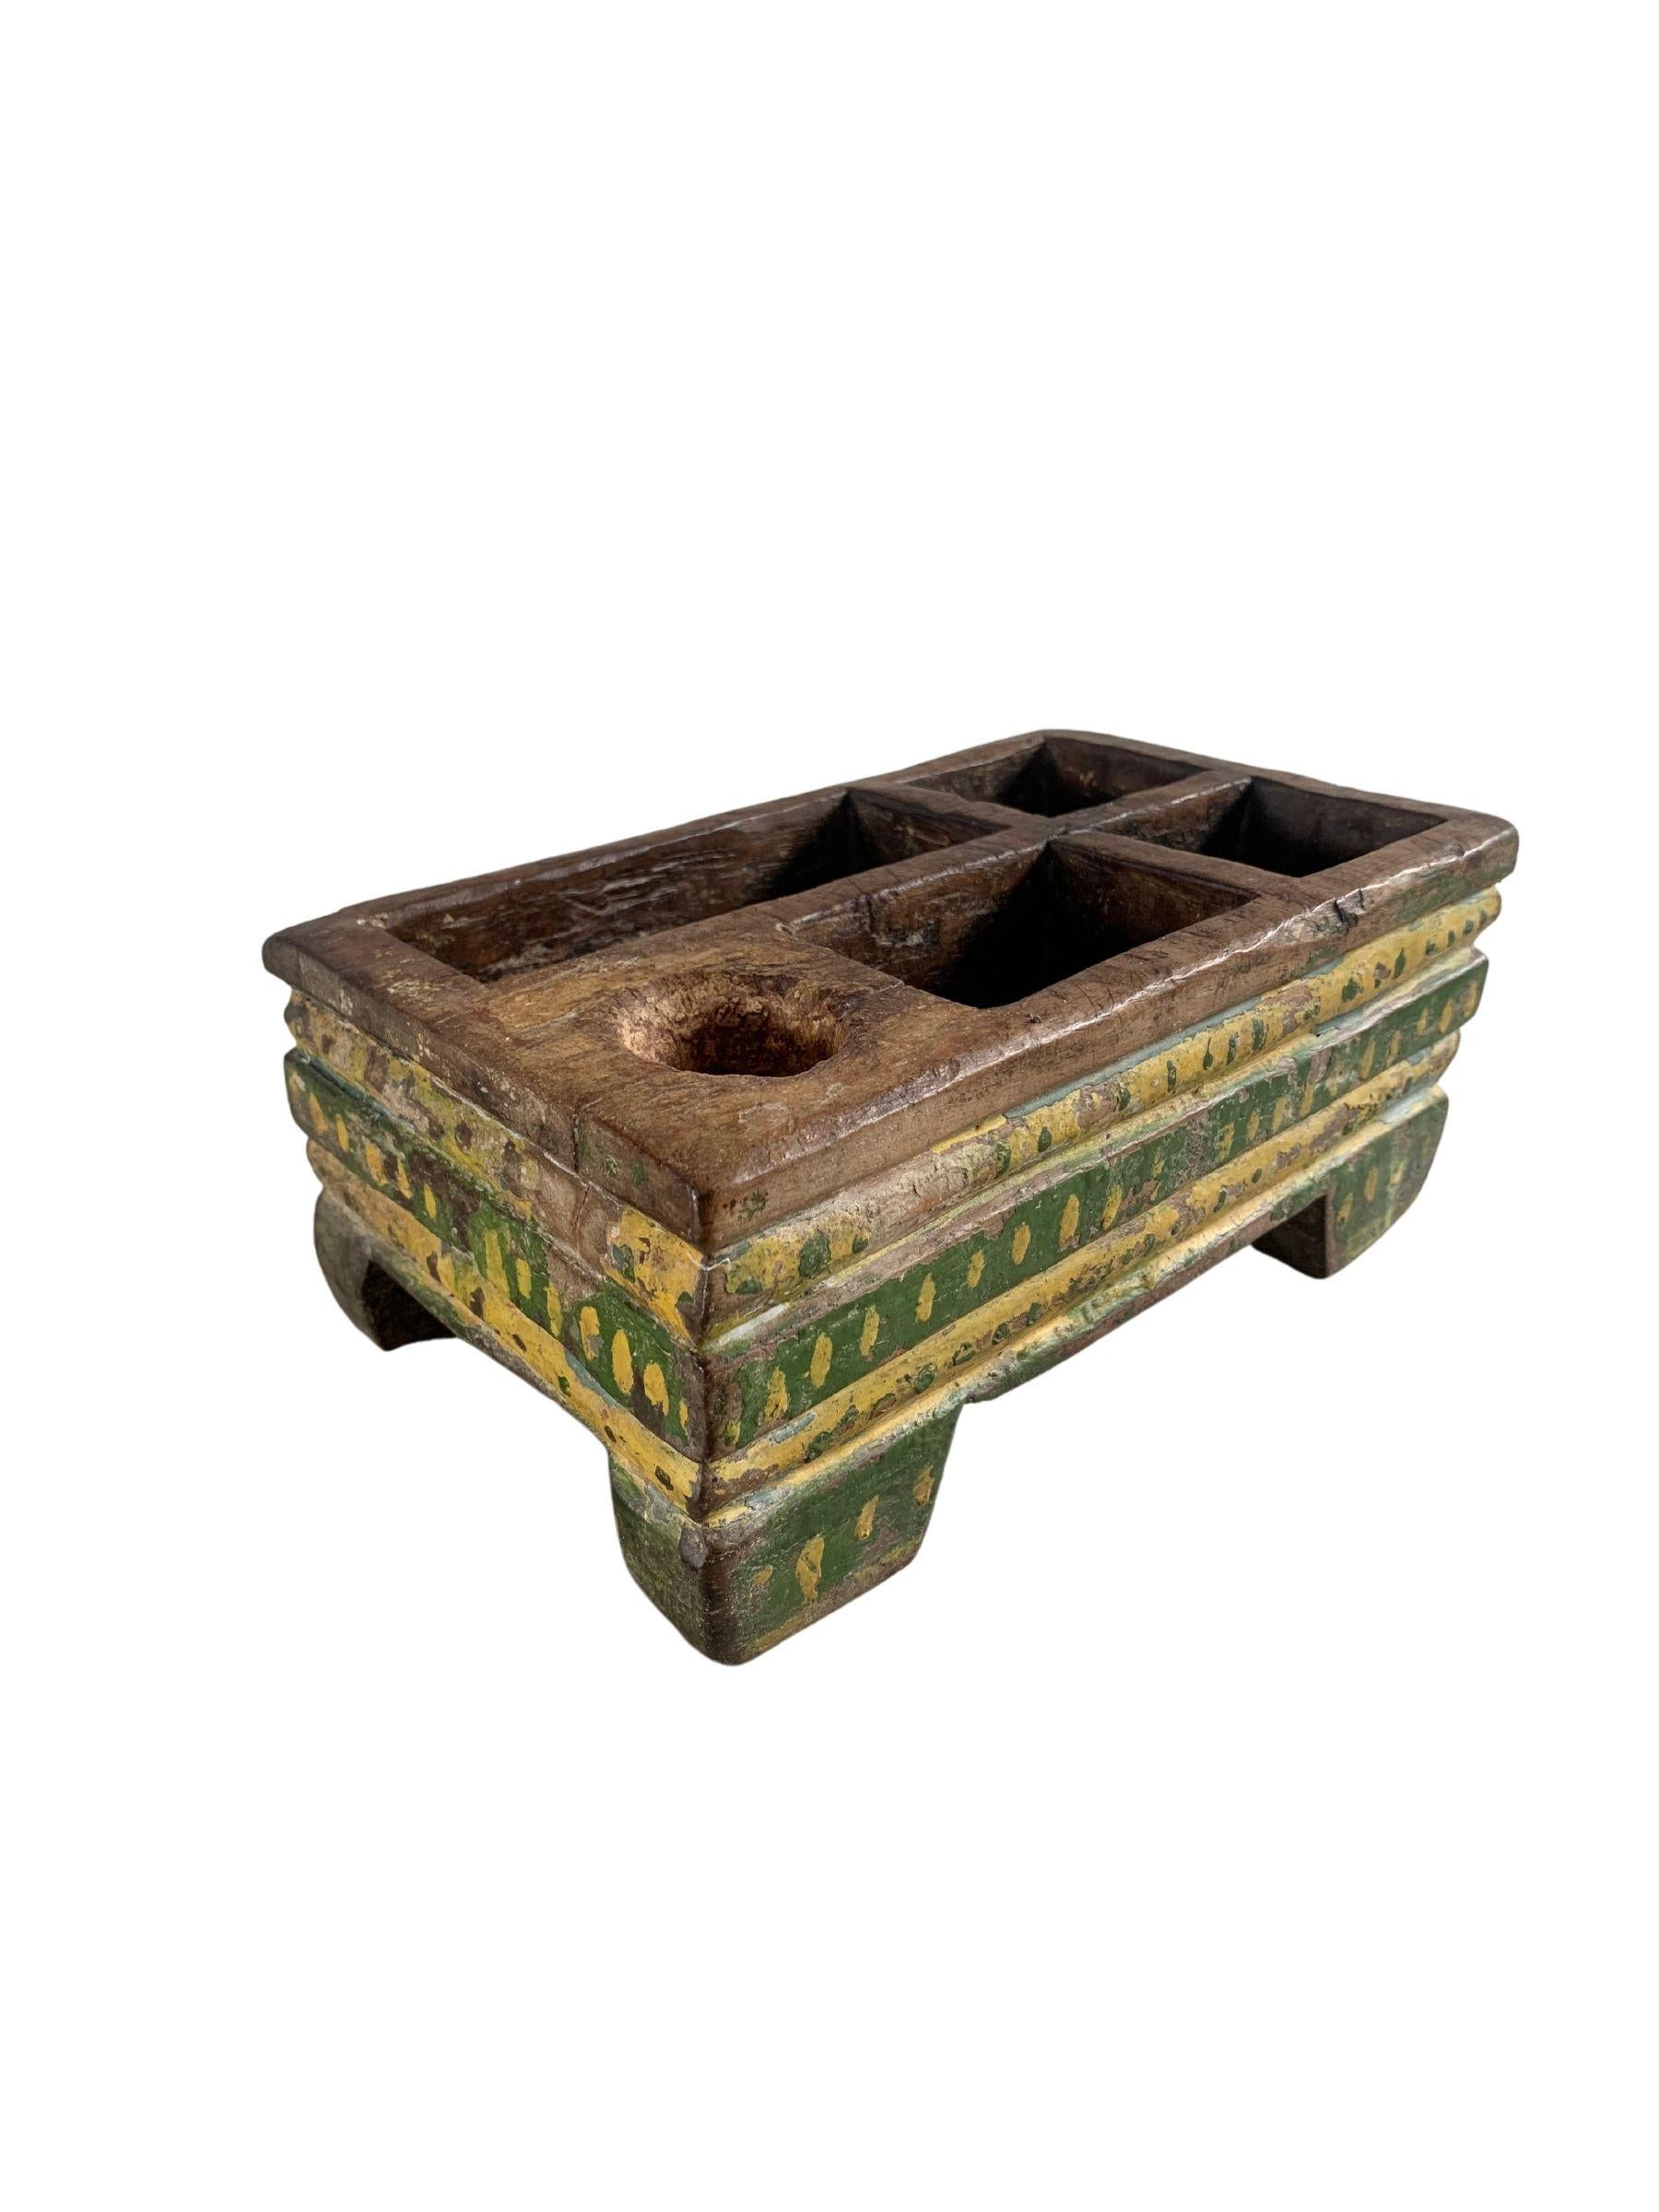 Hardwood Betel Nut Box from Java with Polychromed Finish, Indonesia, c. 1900 For Sale